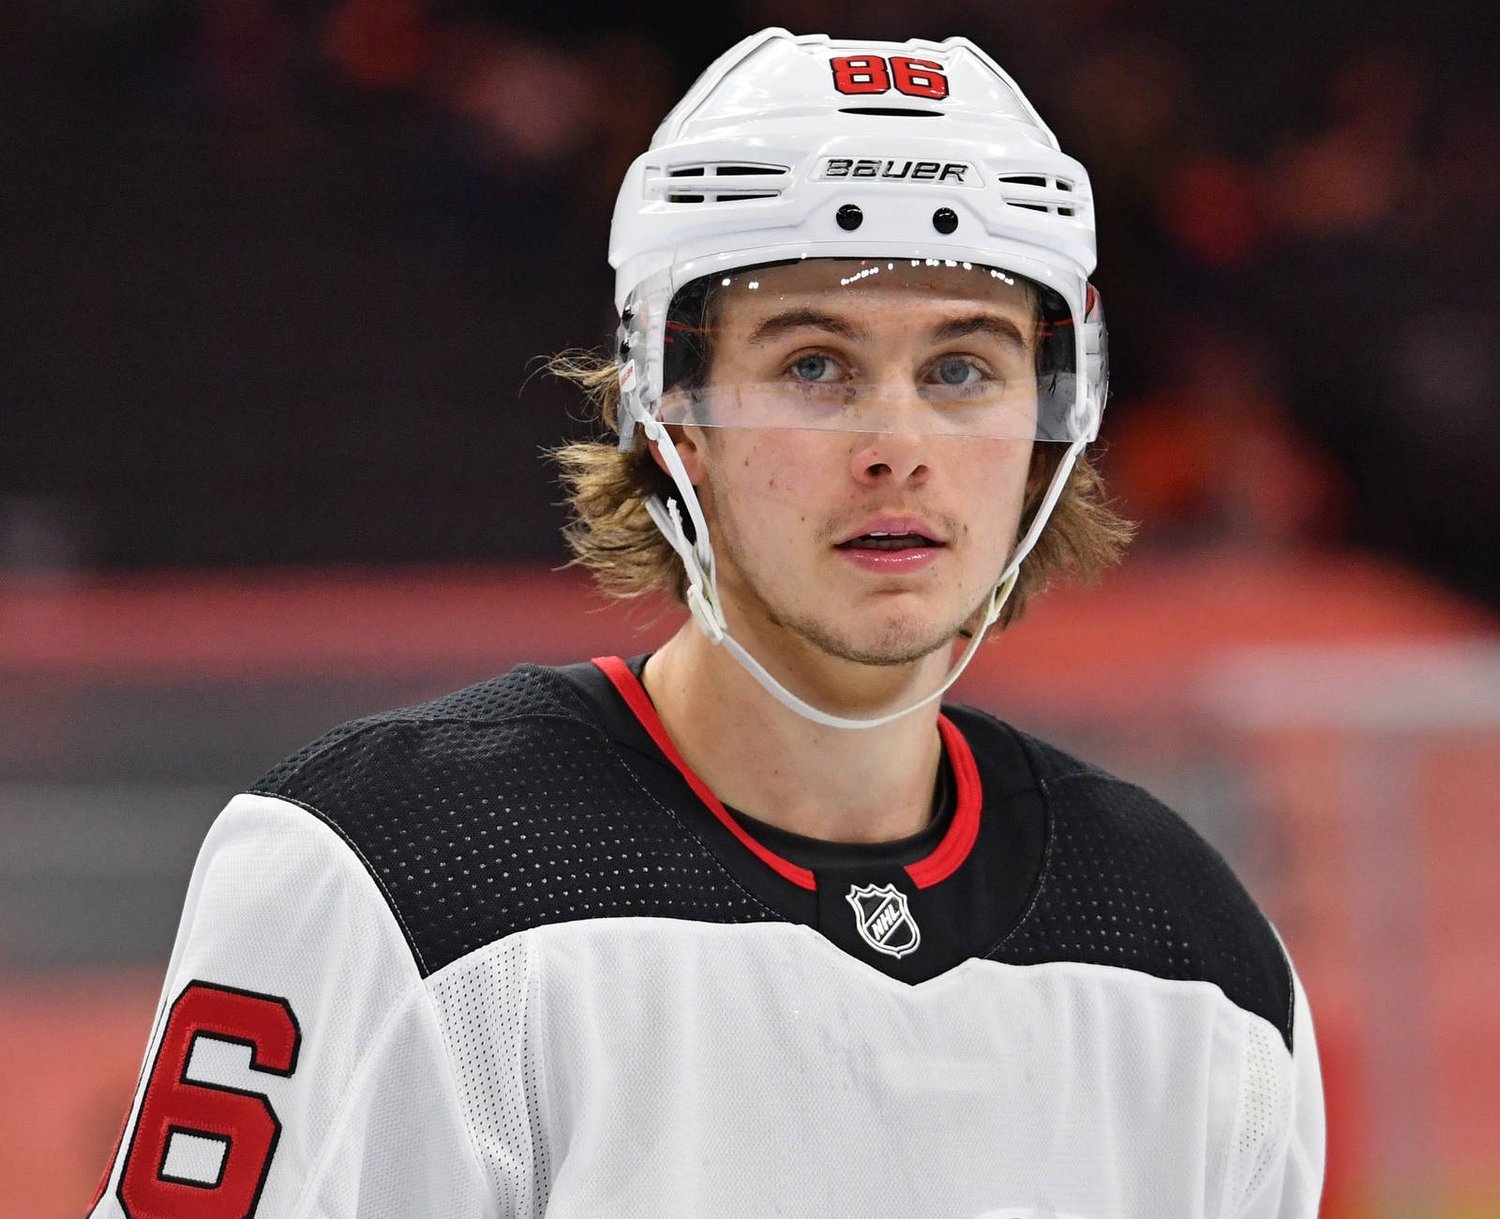 Without Hughes, The Hischier-Bratt Line Needs to Be Better - All